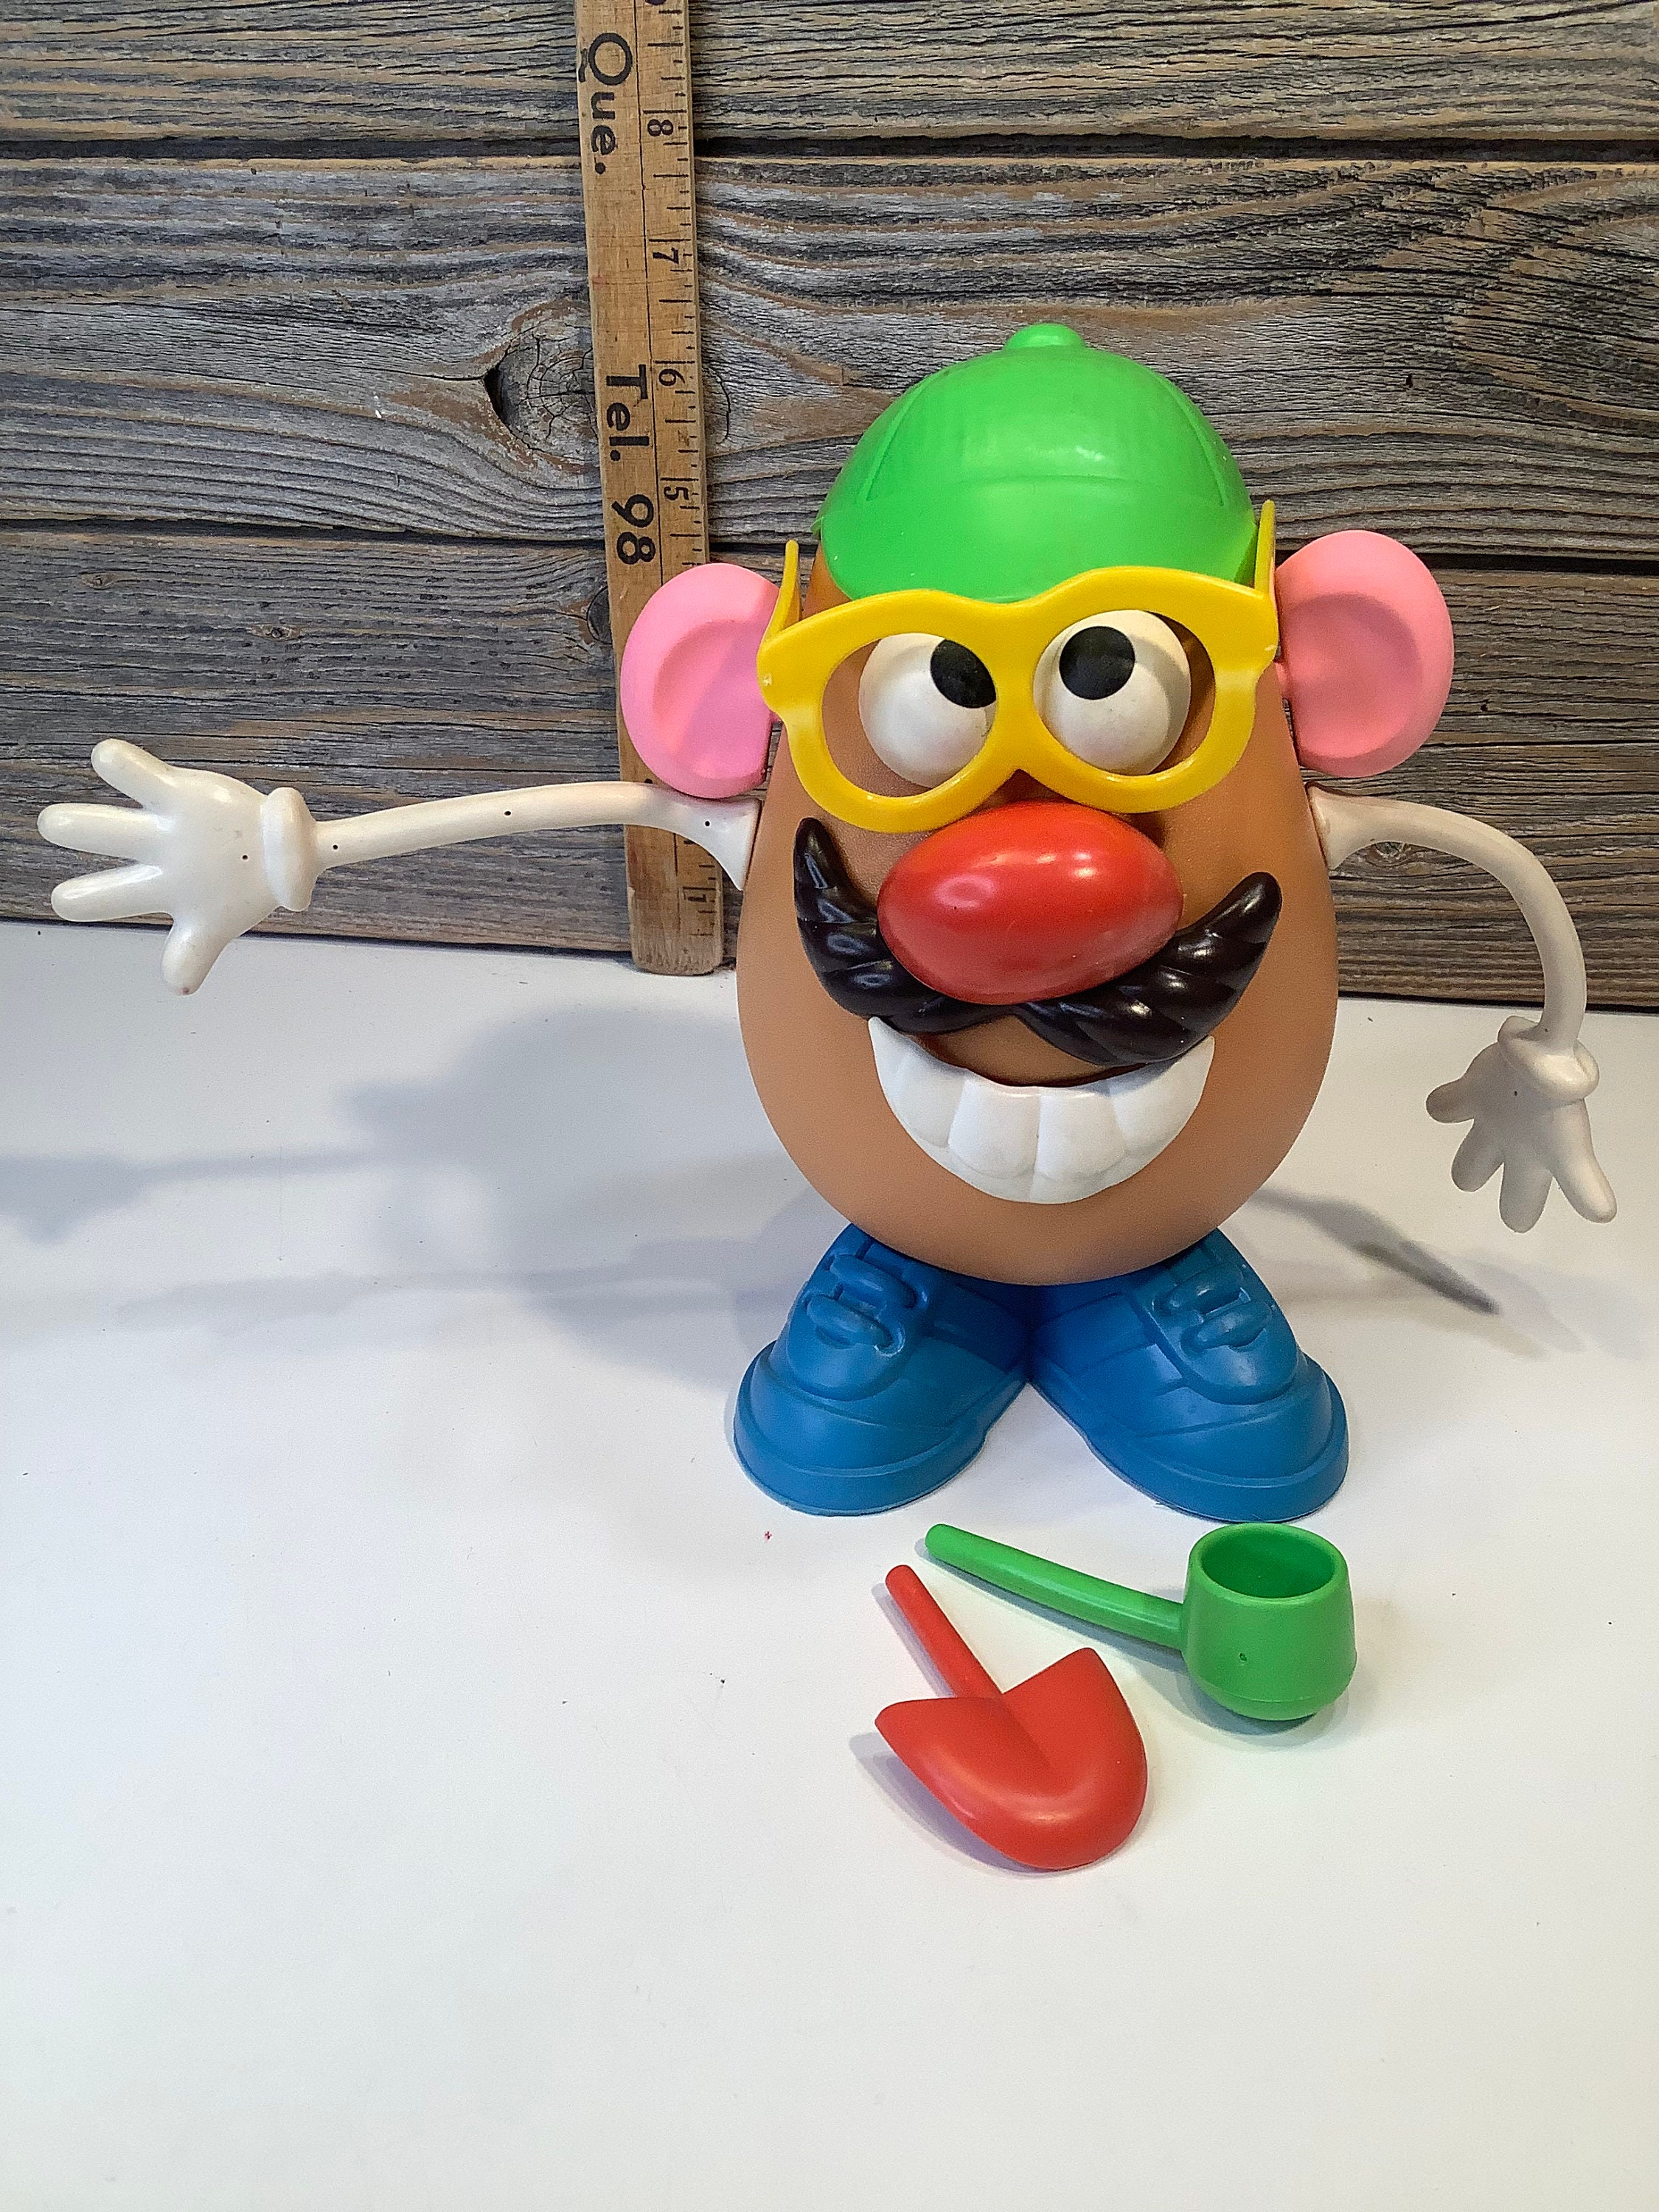 Mr. Potato Head Replacement Parts Mrs. Potato Head Shoes and Accessories  Missing Pieces for Potato Head Glasses Lips Shoes Arms Hats 